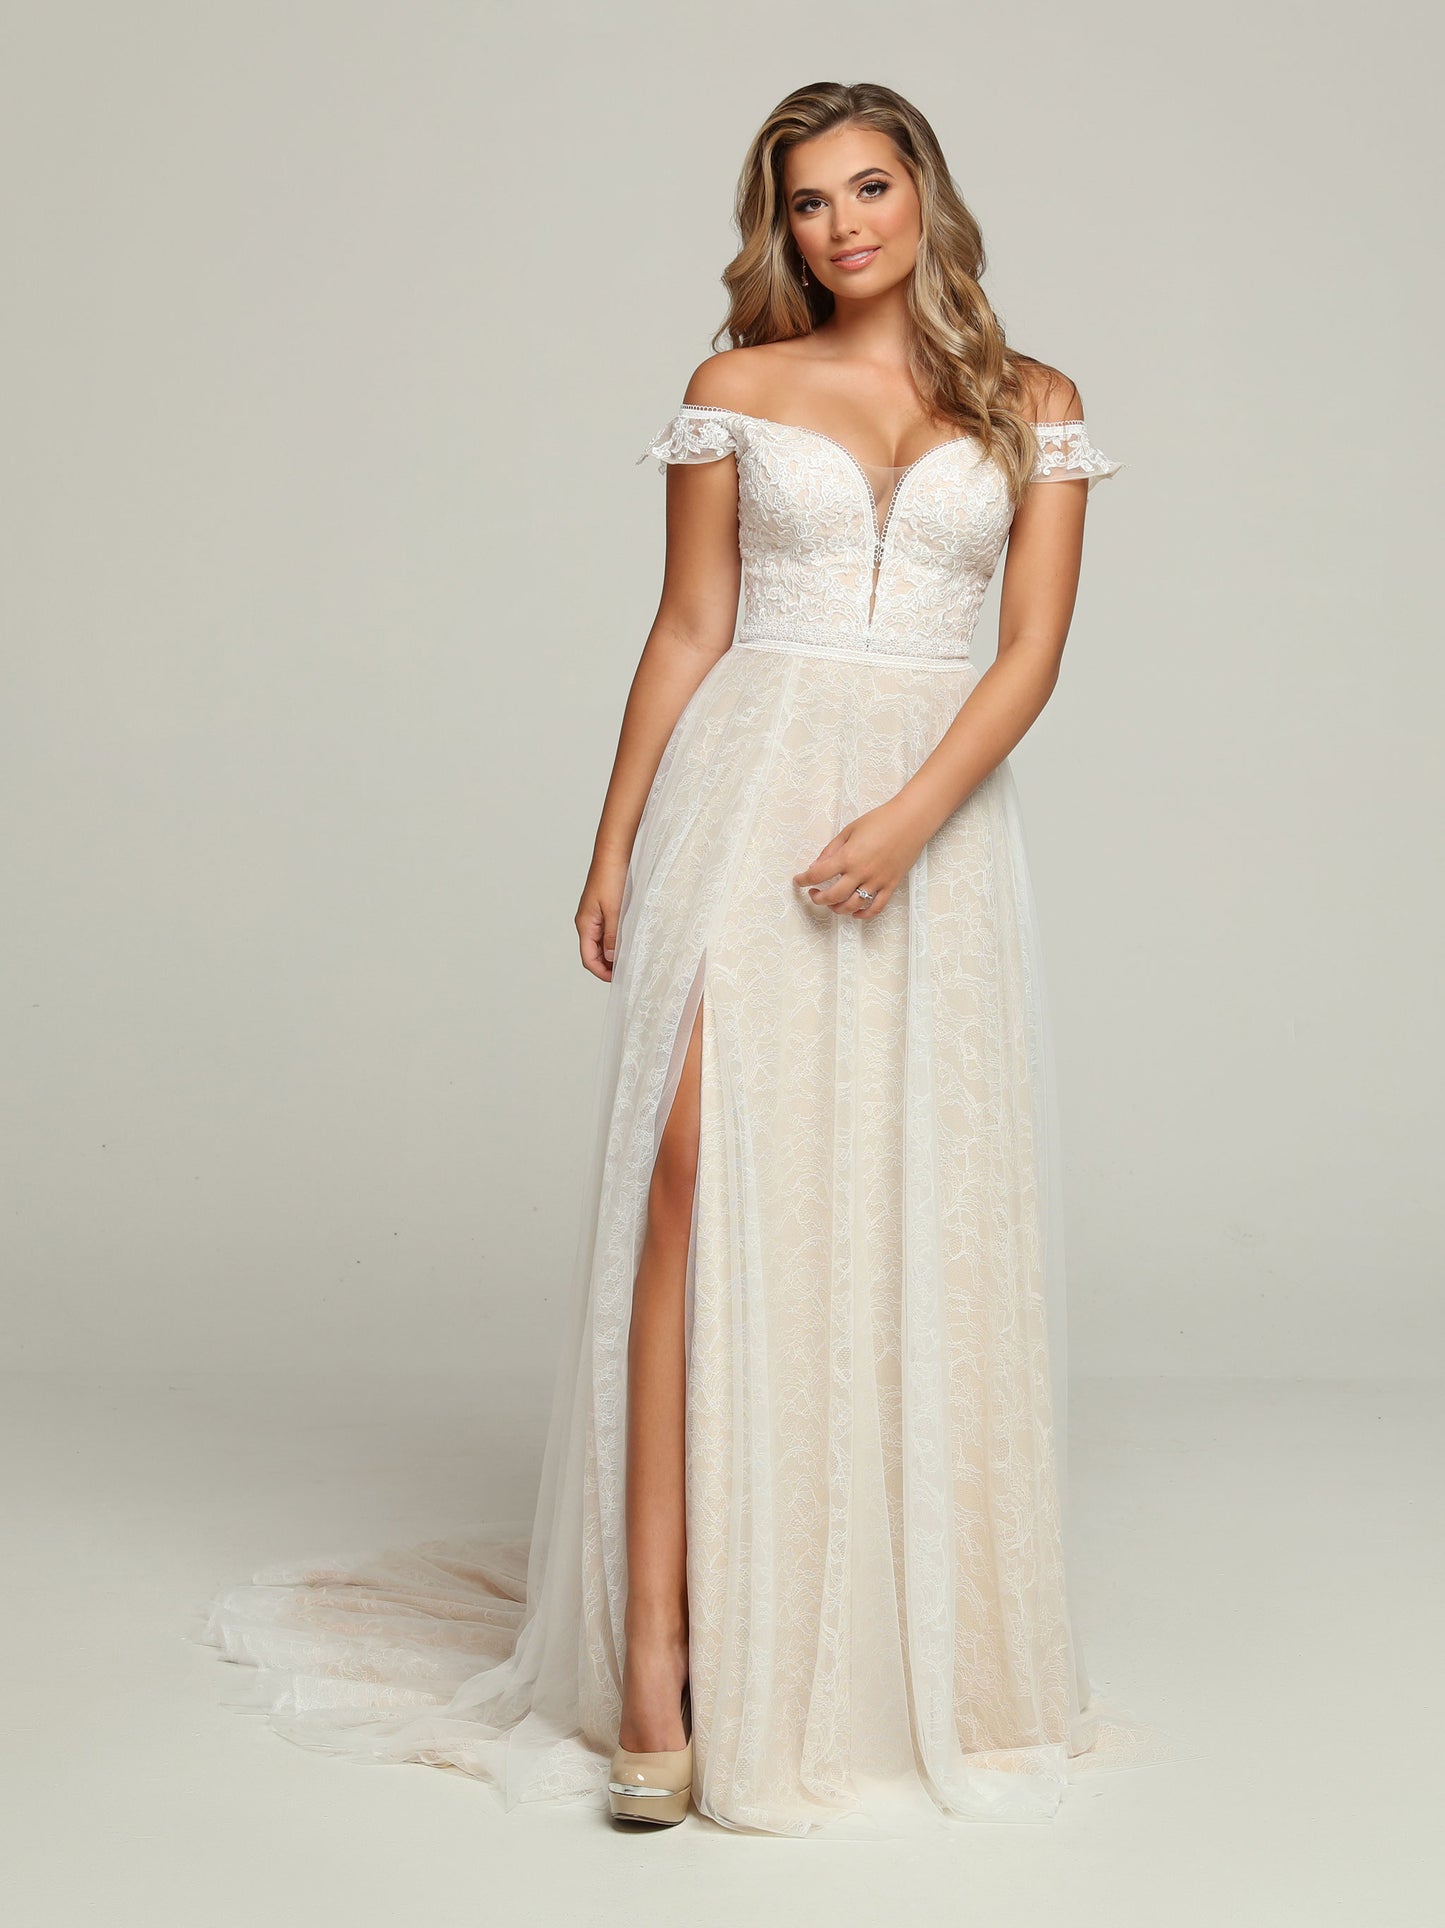 Davinci Bridal 50693 Long Lace A Line off the Shoulder Boho Wedding Dress Maxi Slit Bridal Gown Feminine & Alluring, this Lace A-Line Wedding Dress features a Plunging Sweetheart Neckline with Modesty Panel & Ruffled Off the Shoulder Straps. Lace Applique Accents the Bodice set off the Full Chapel Length Lace Skirt. A Thigh-High Slit finishes the look.